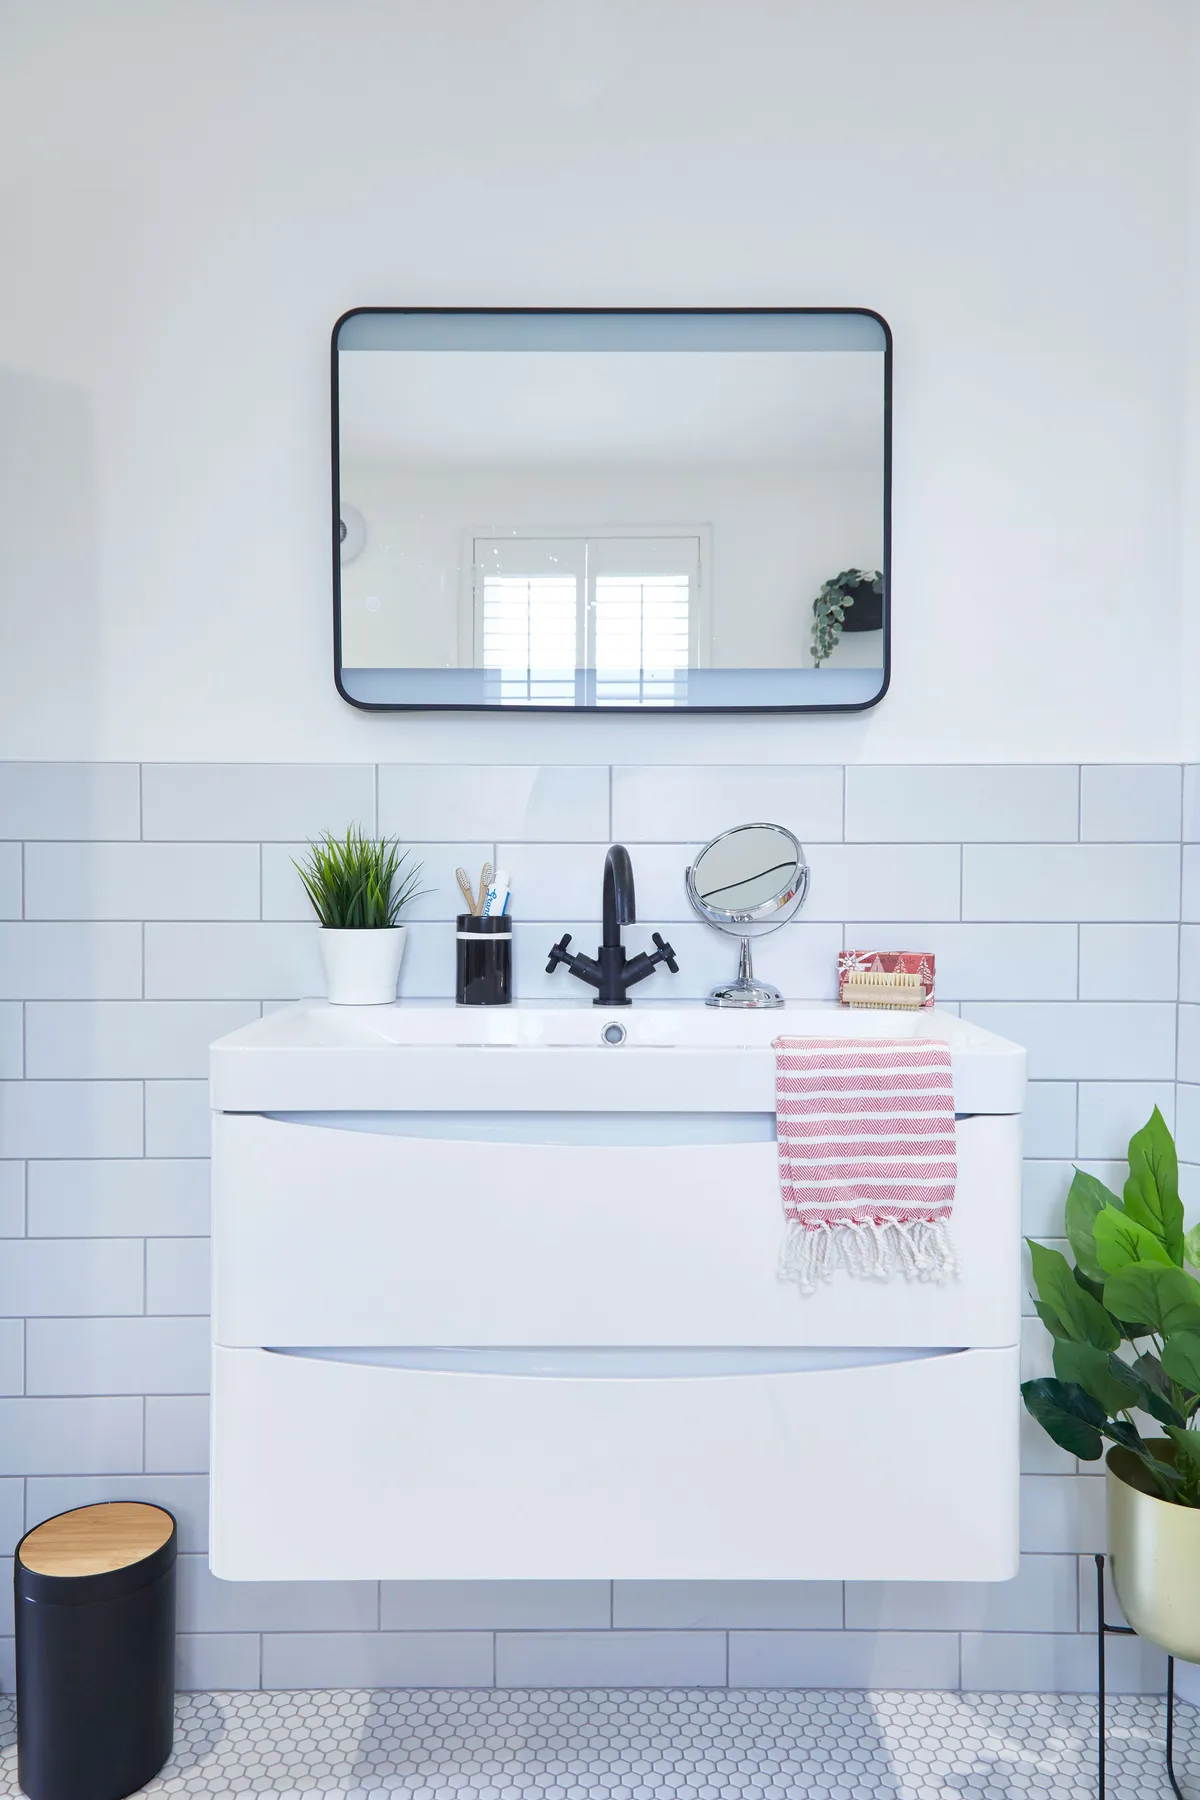 For a busy family bathroom, choose a sink as large as your space will allow. Emily’s floating wall unit has built-in drawers for a space-saving clutter solution